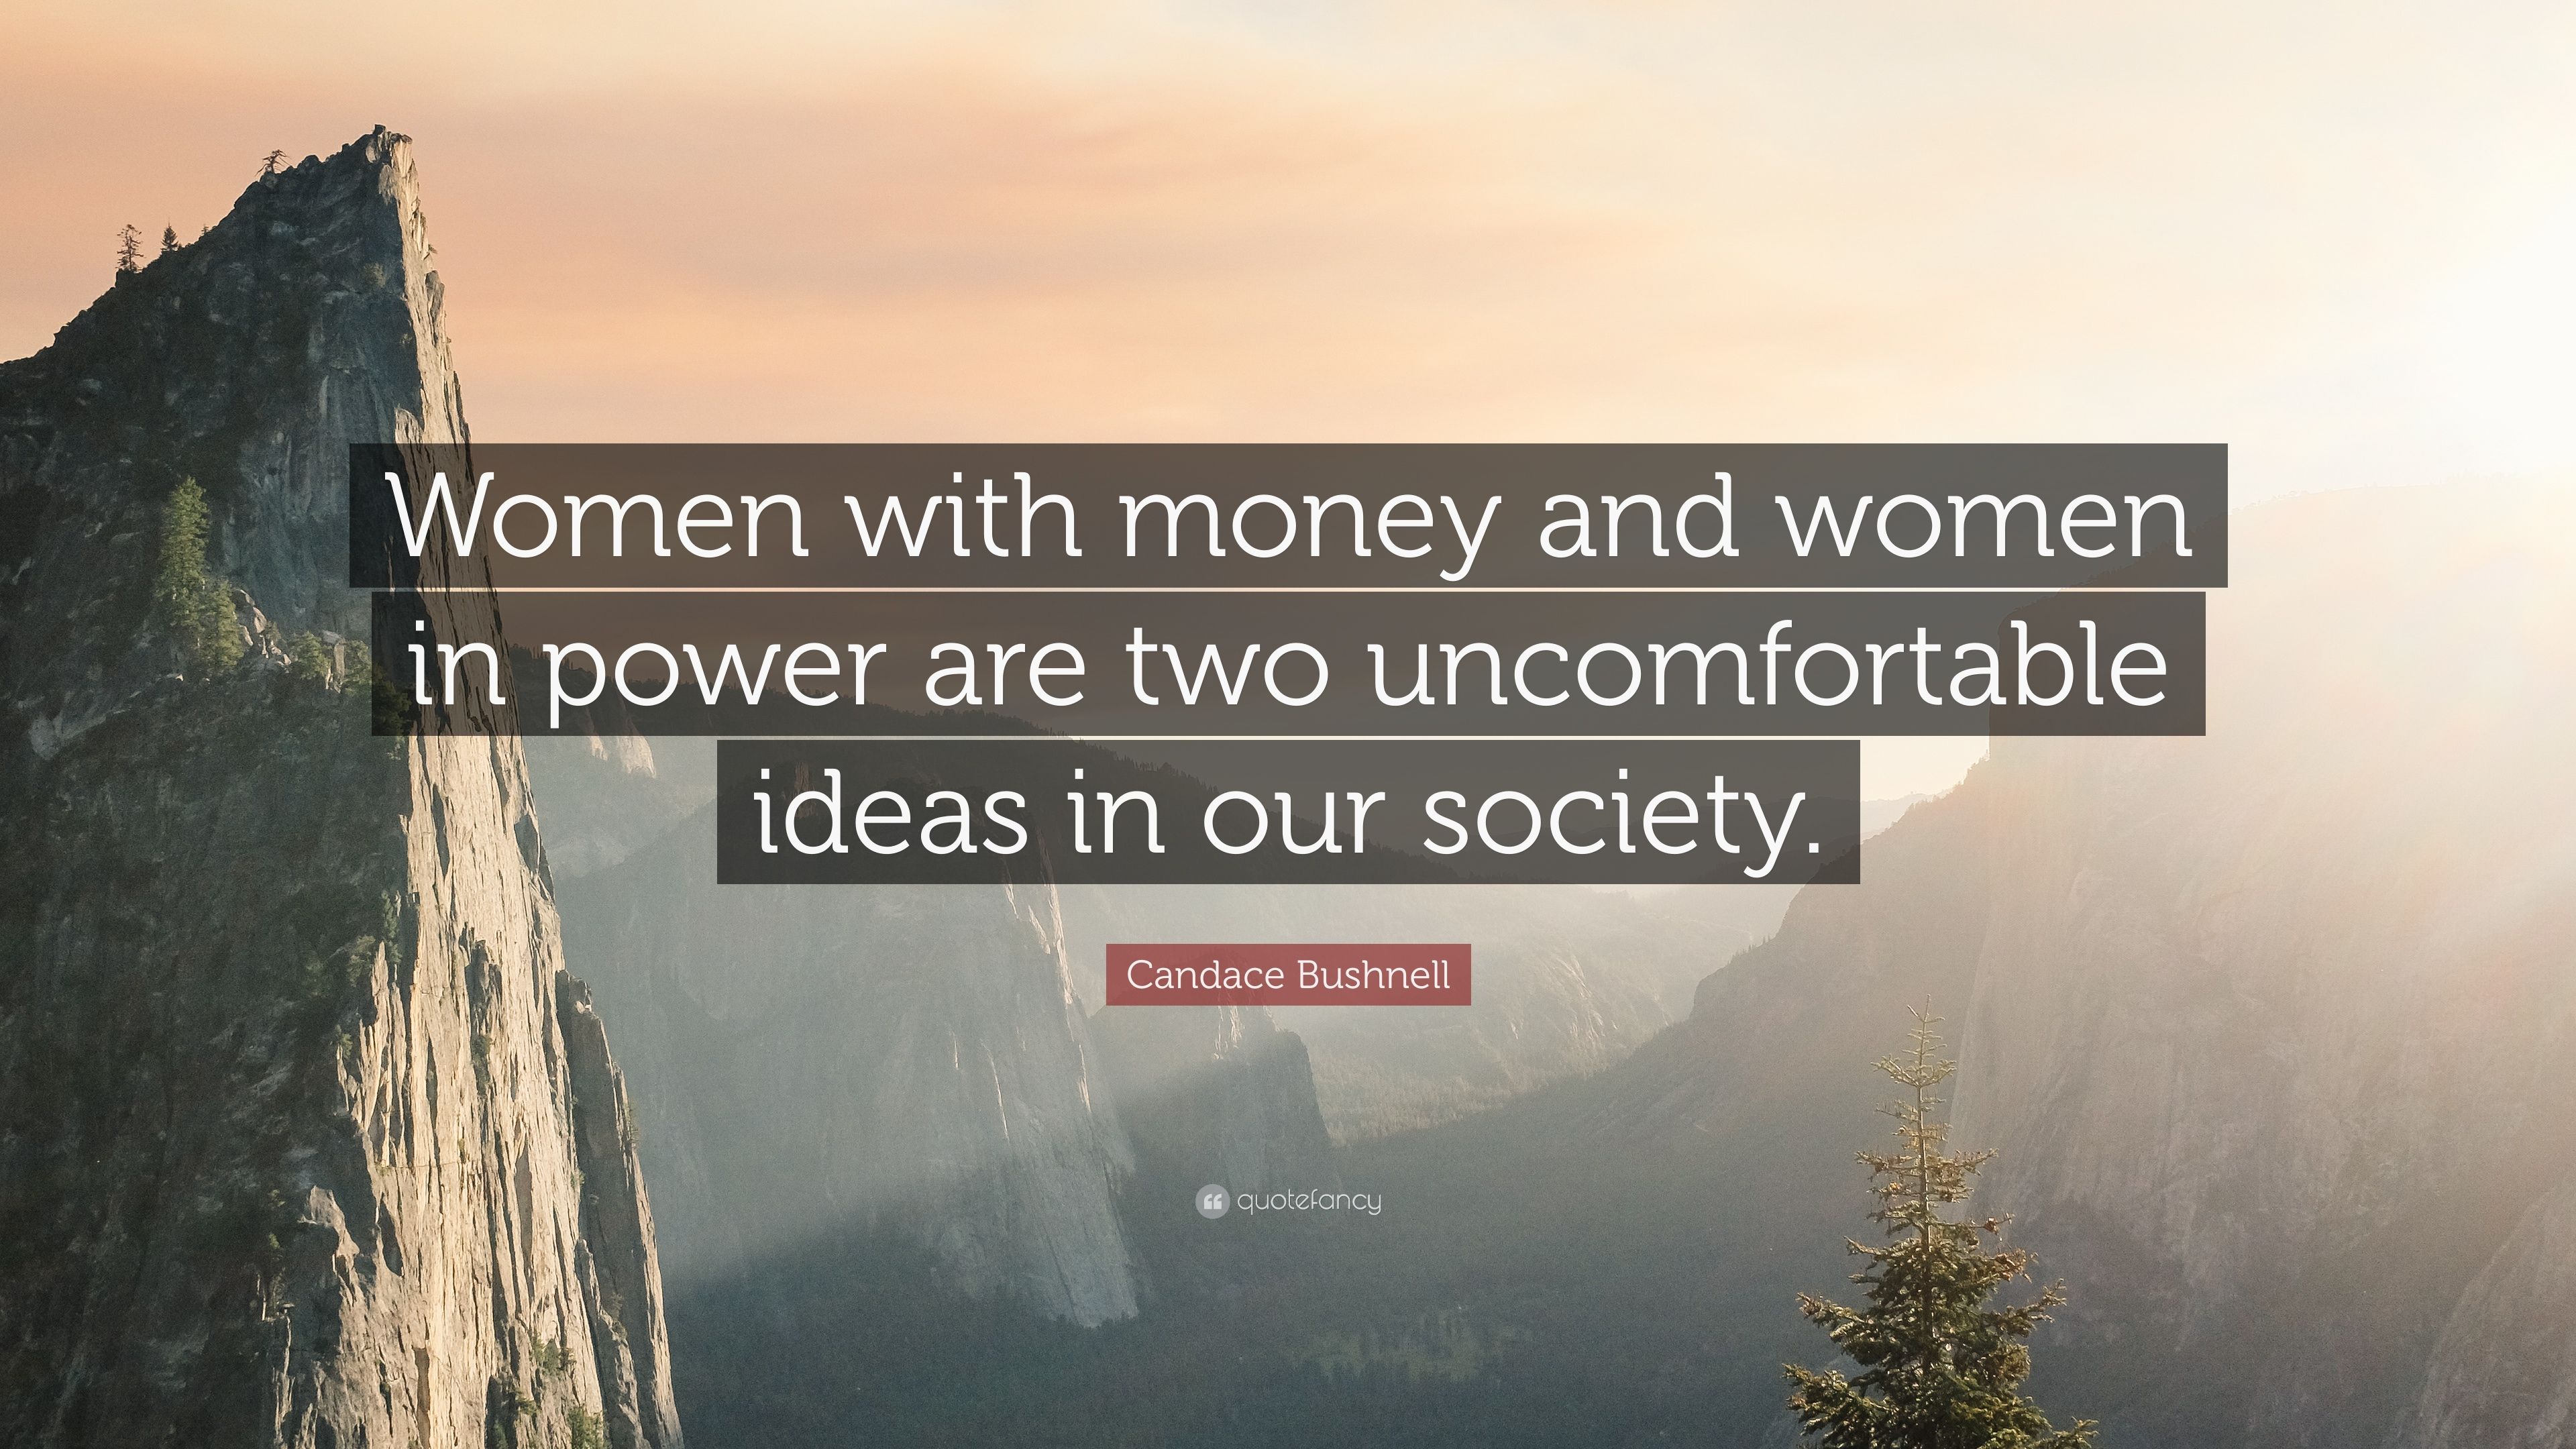 Candace Bushnell Quote: “Women with money and women in power are